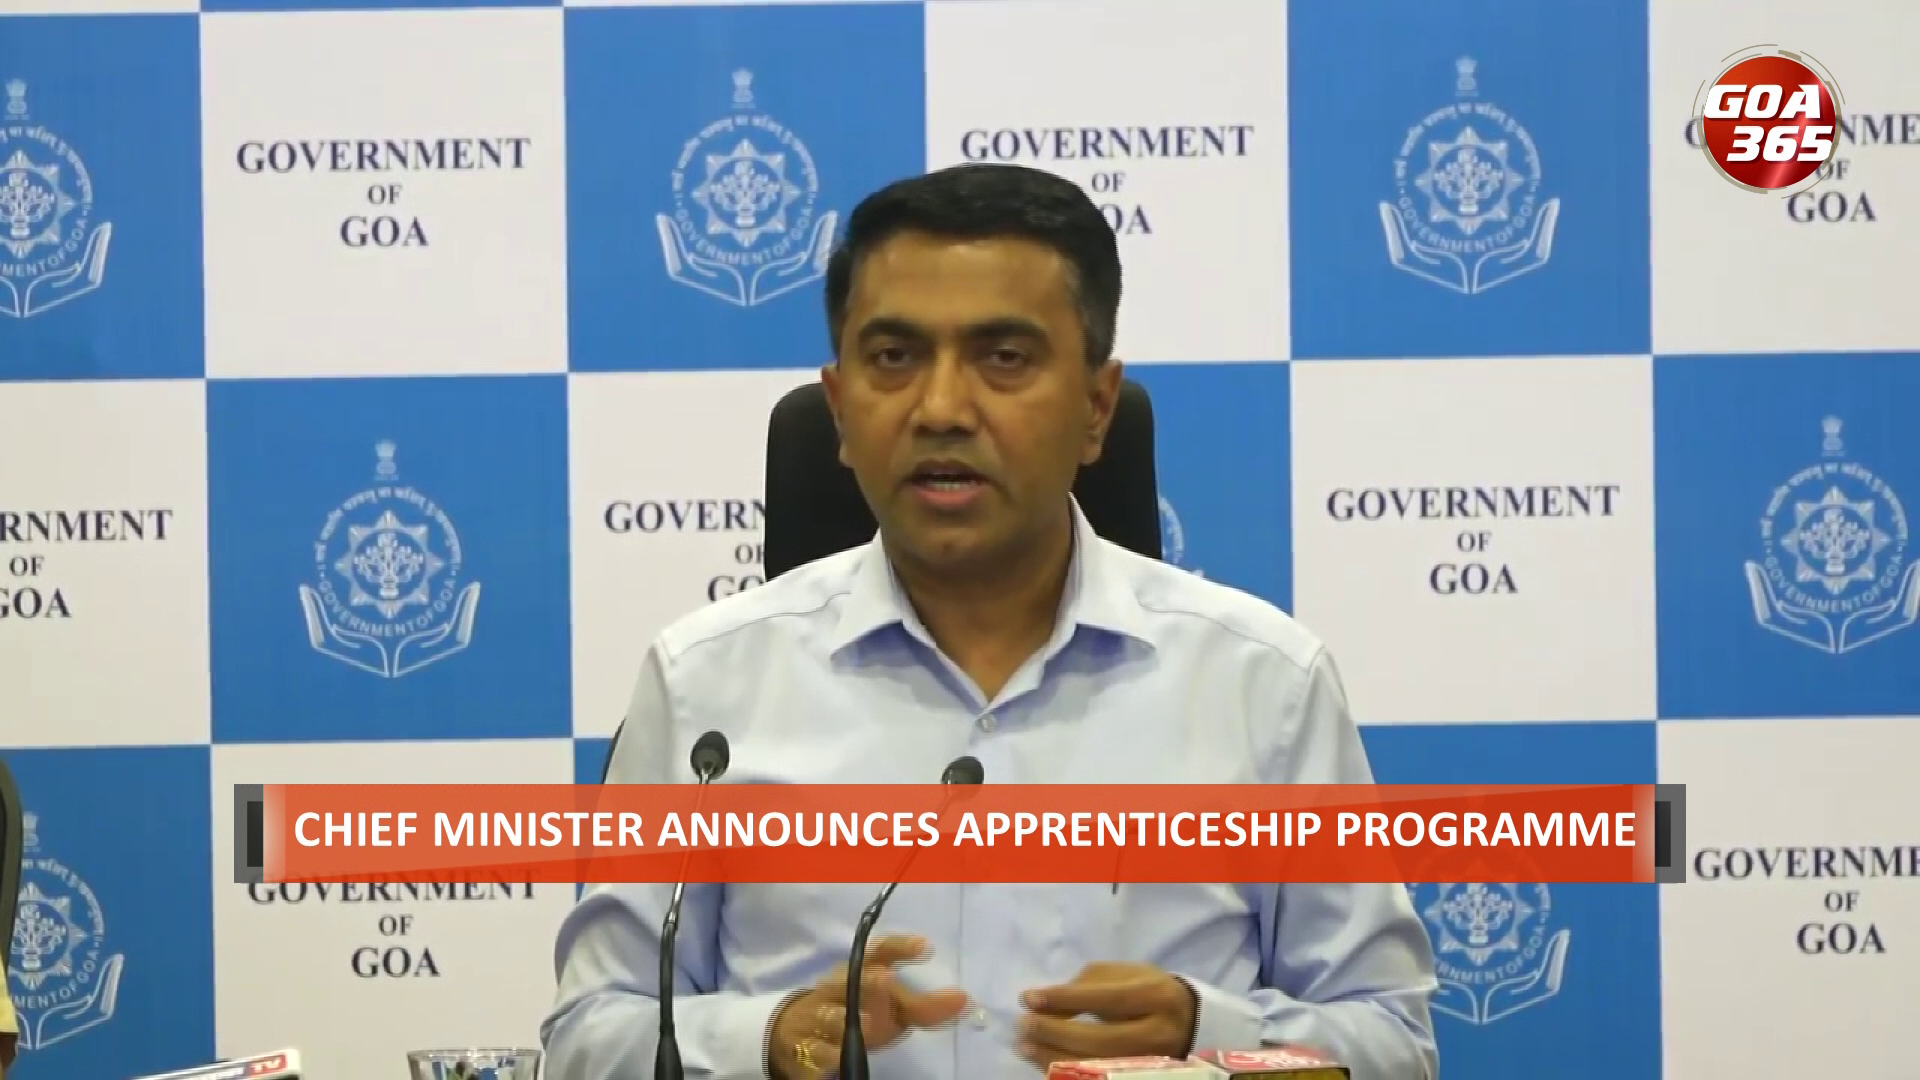 Govt announces Apprenticeship Programme aimed at upskilling youth || ENGLISH || GOA365 